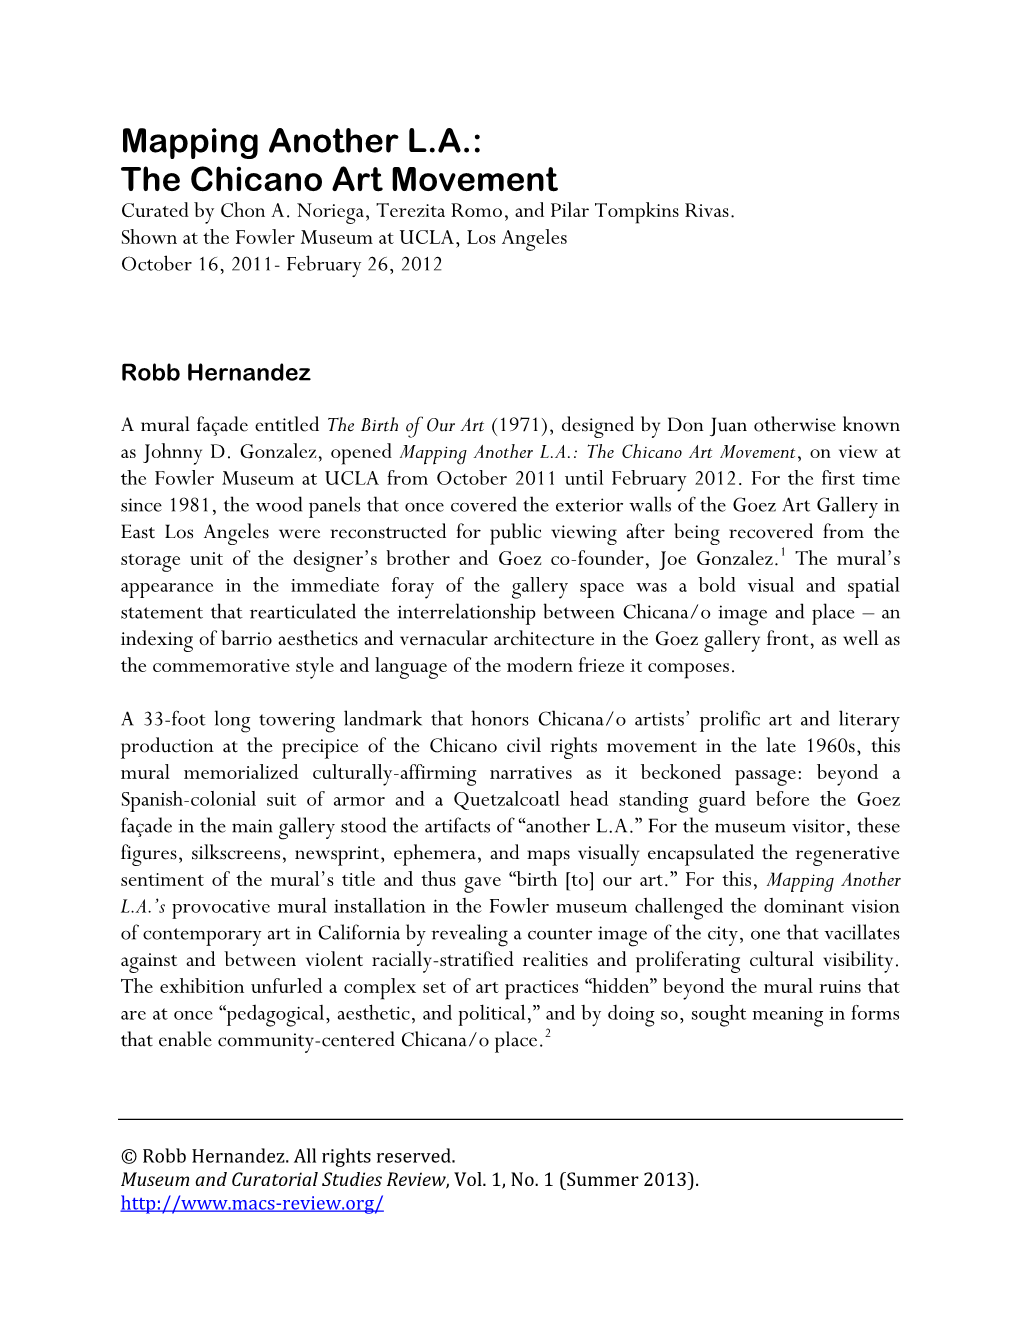 The Chicano Art Movement Curated by Chon A